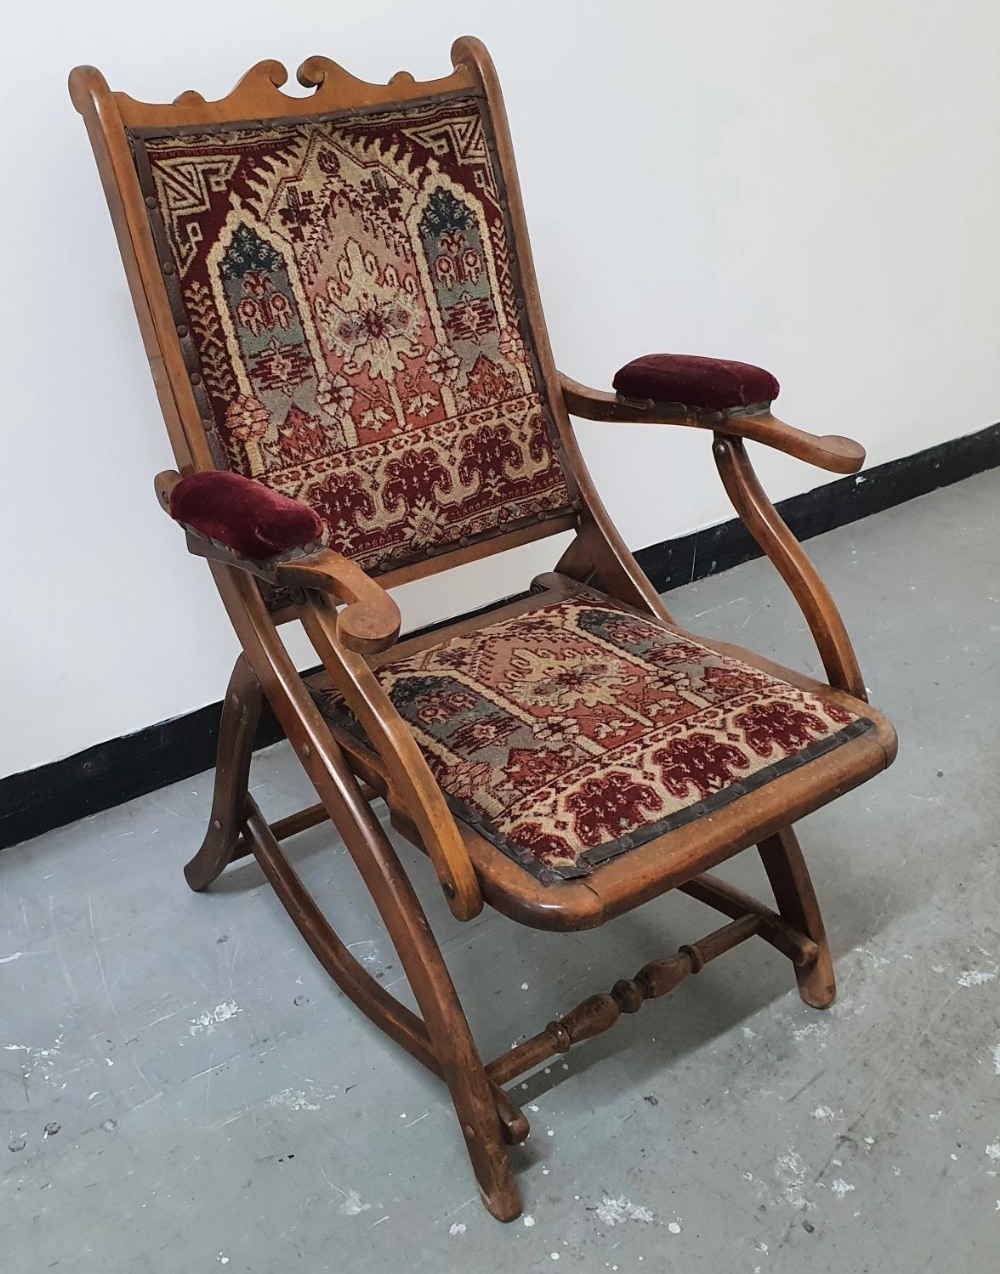 Victorian campaign chair, 87 x 58 x 62 cm - Image 2 of 5